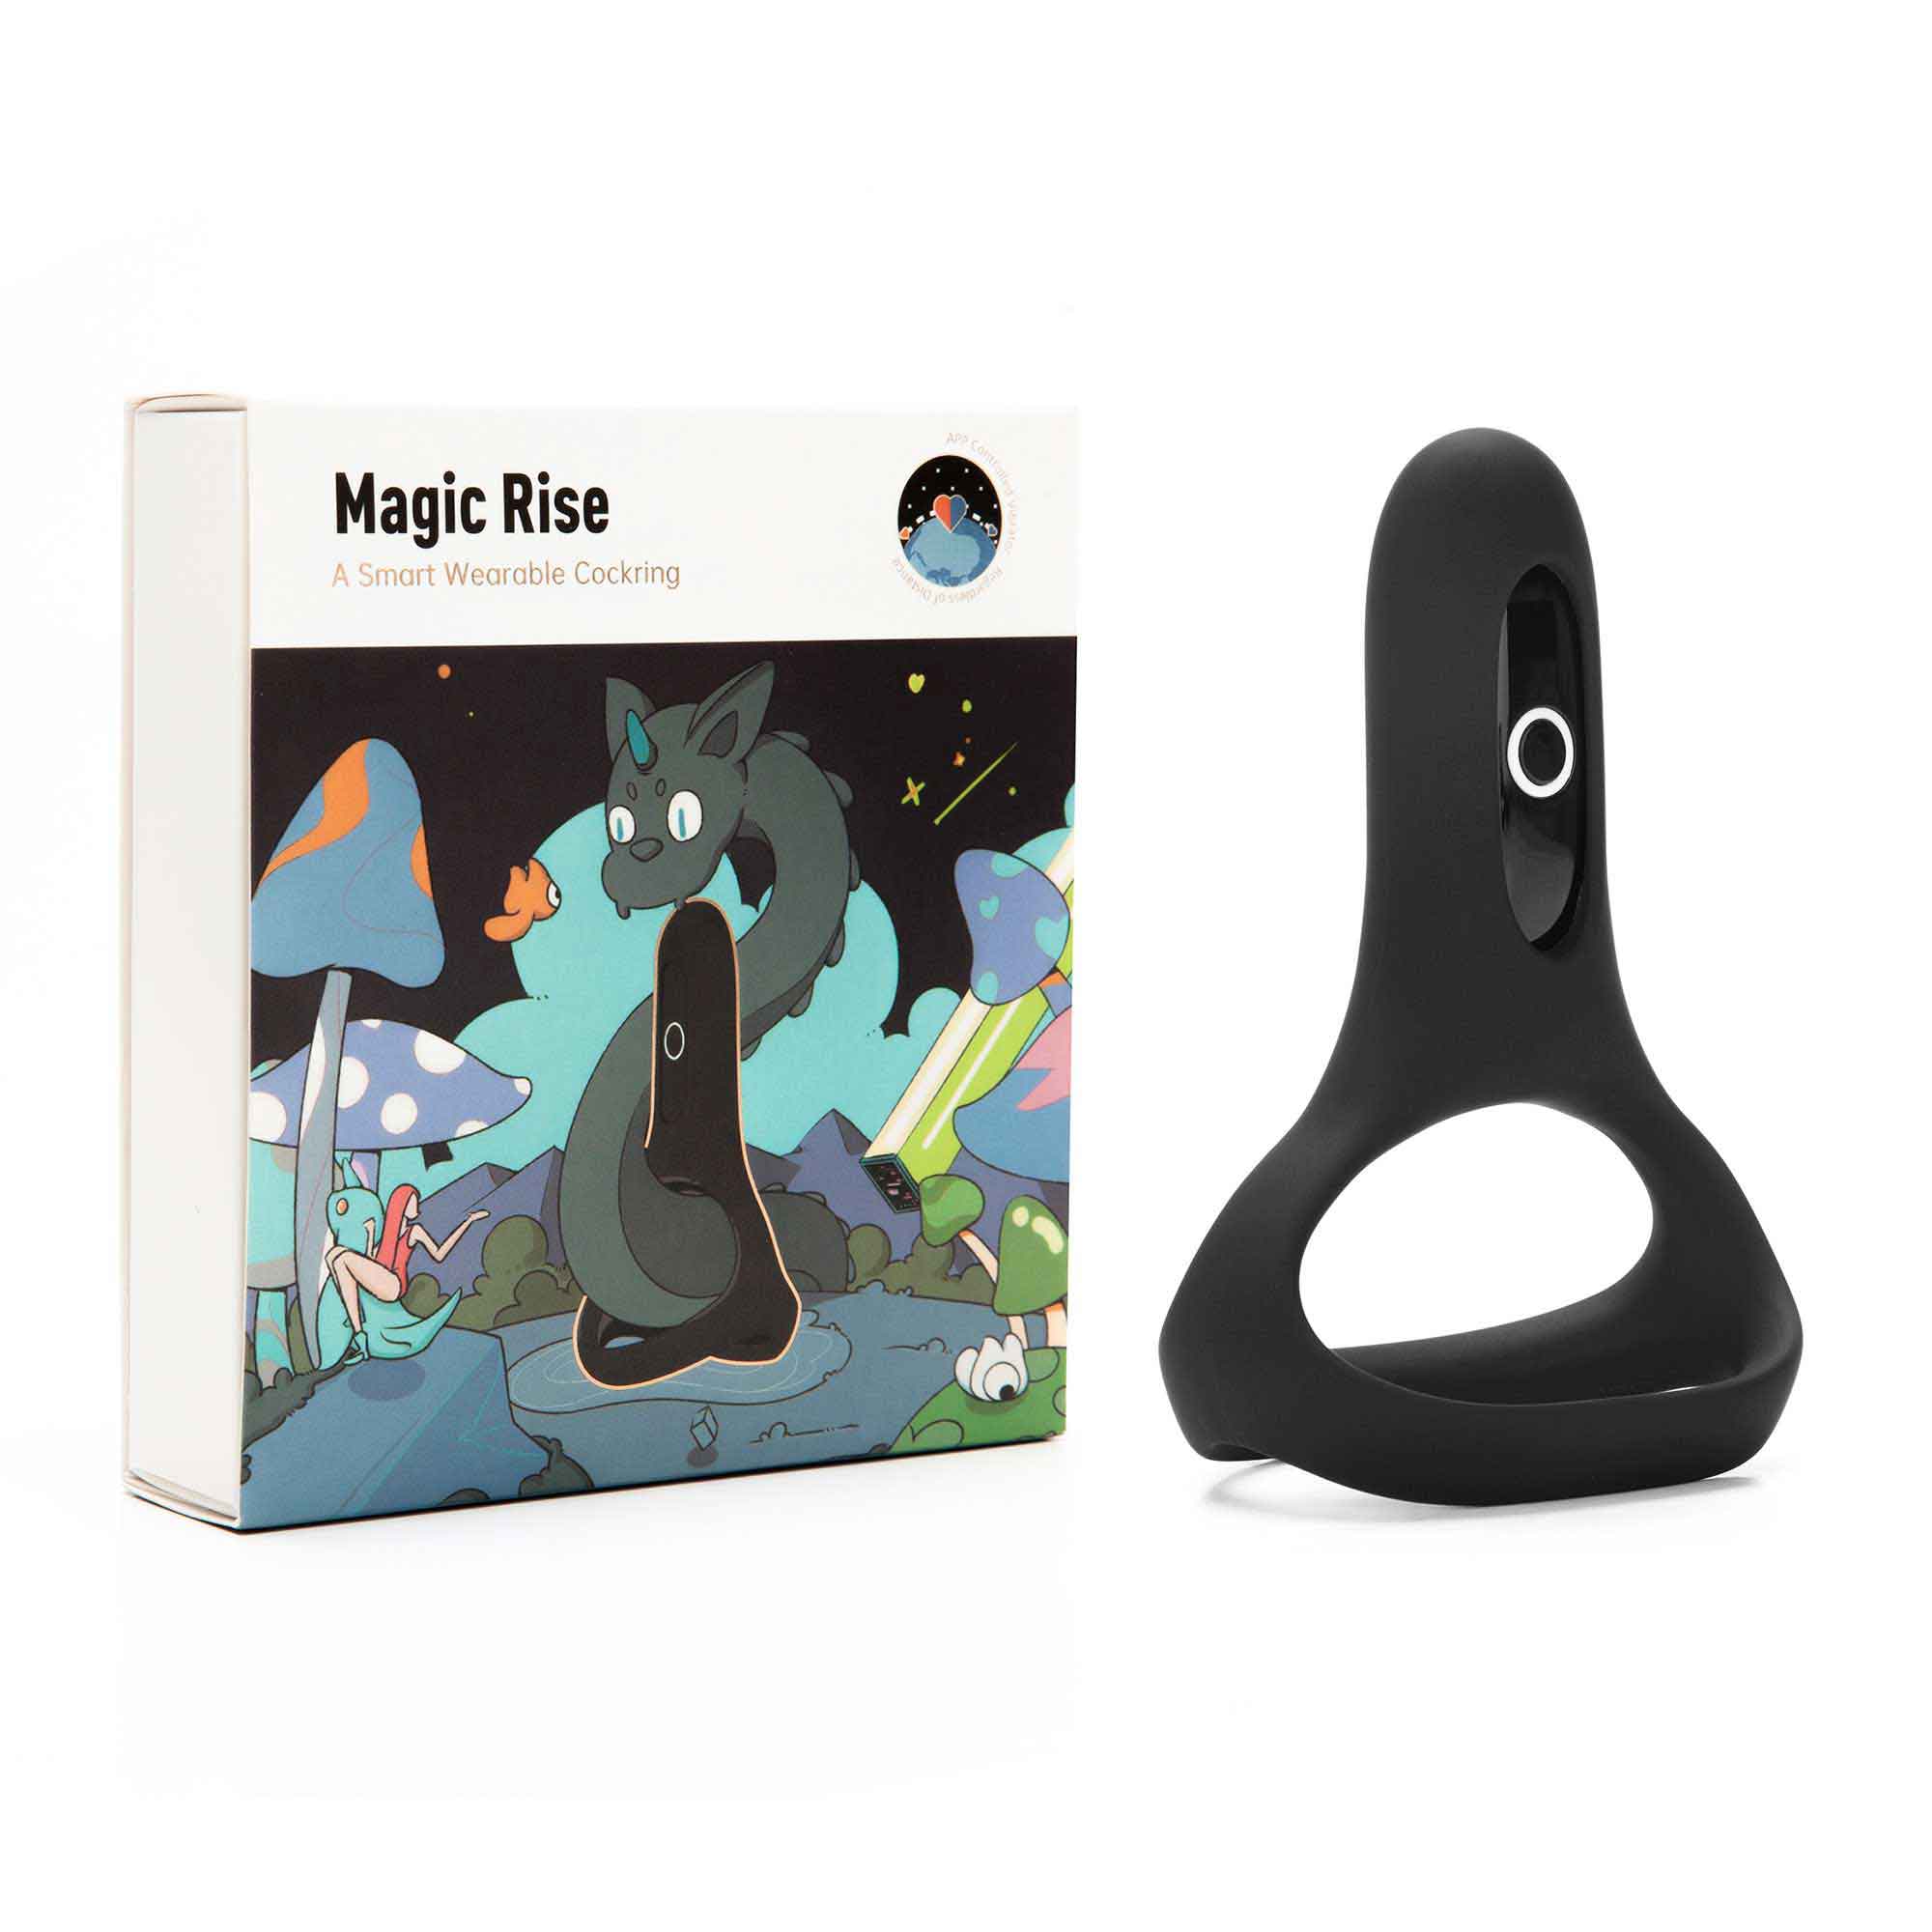 Magic Motion Rise BLACK APP Controlled A Smart Wearable Cockring - MM-RISE BLK